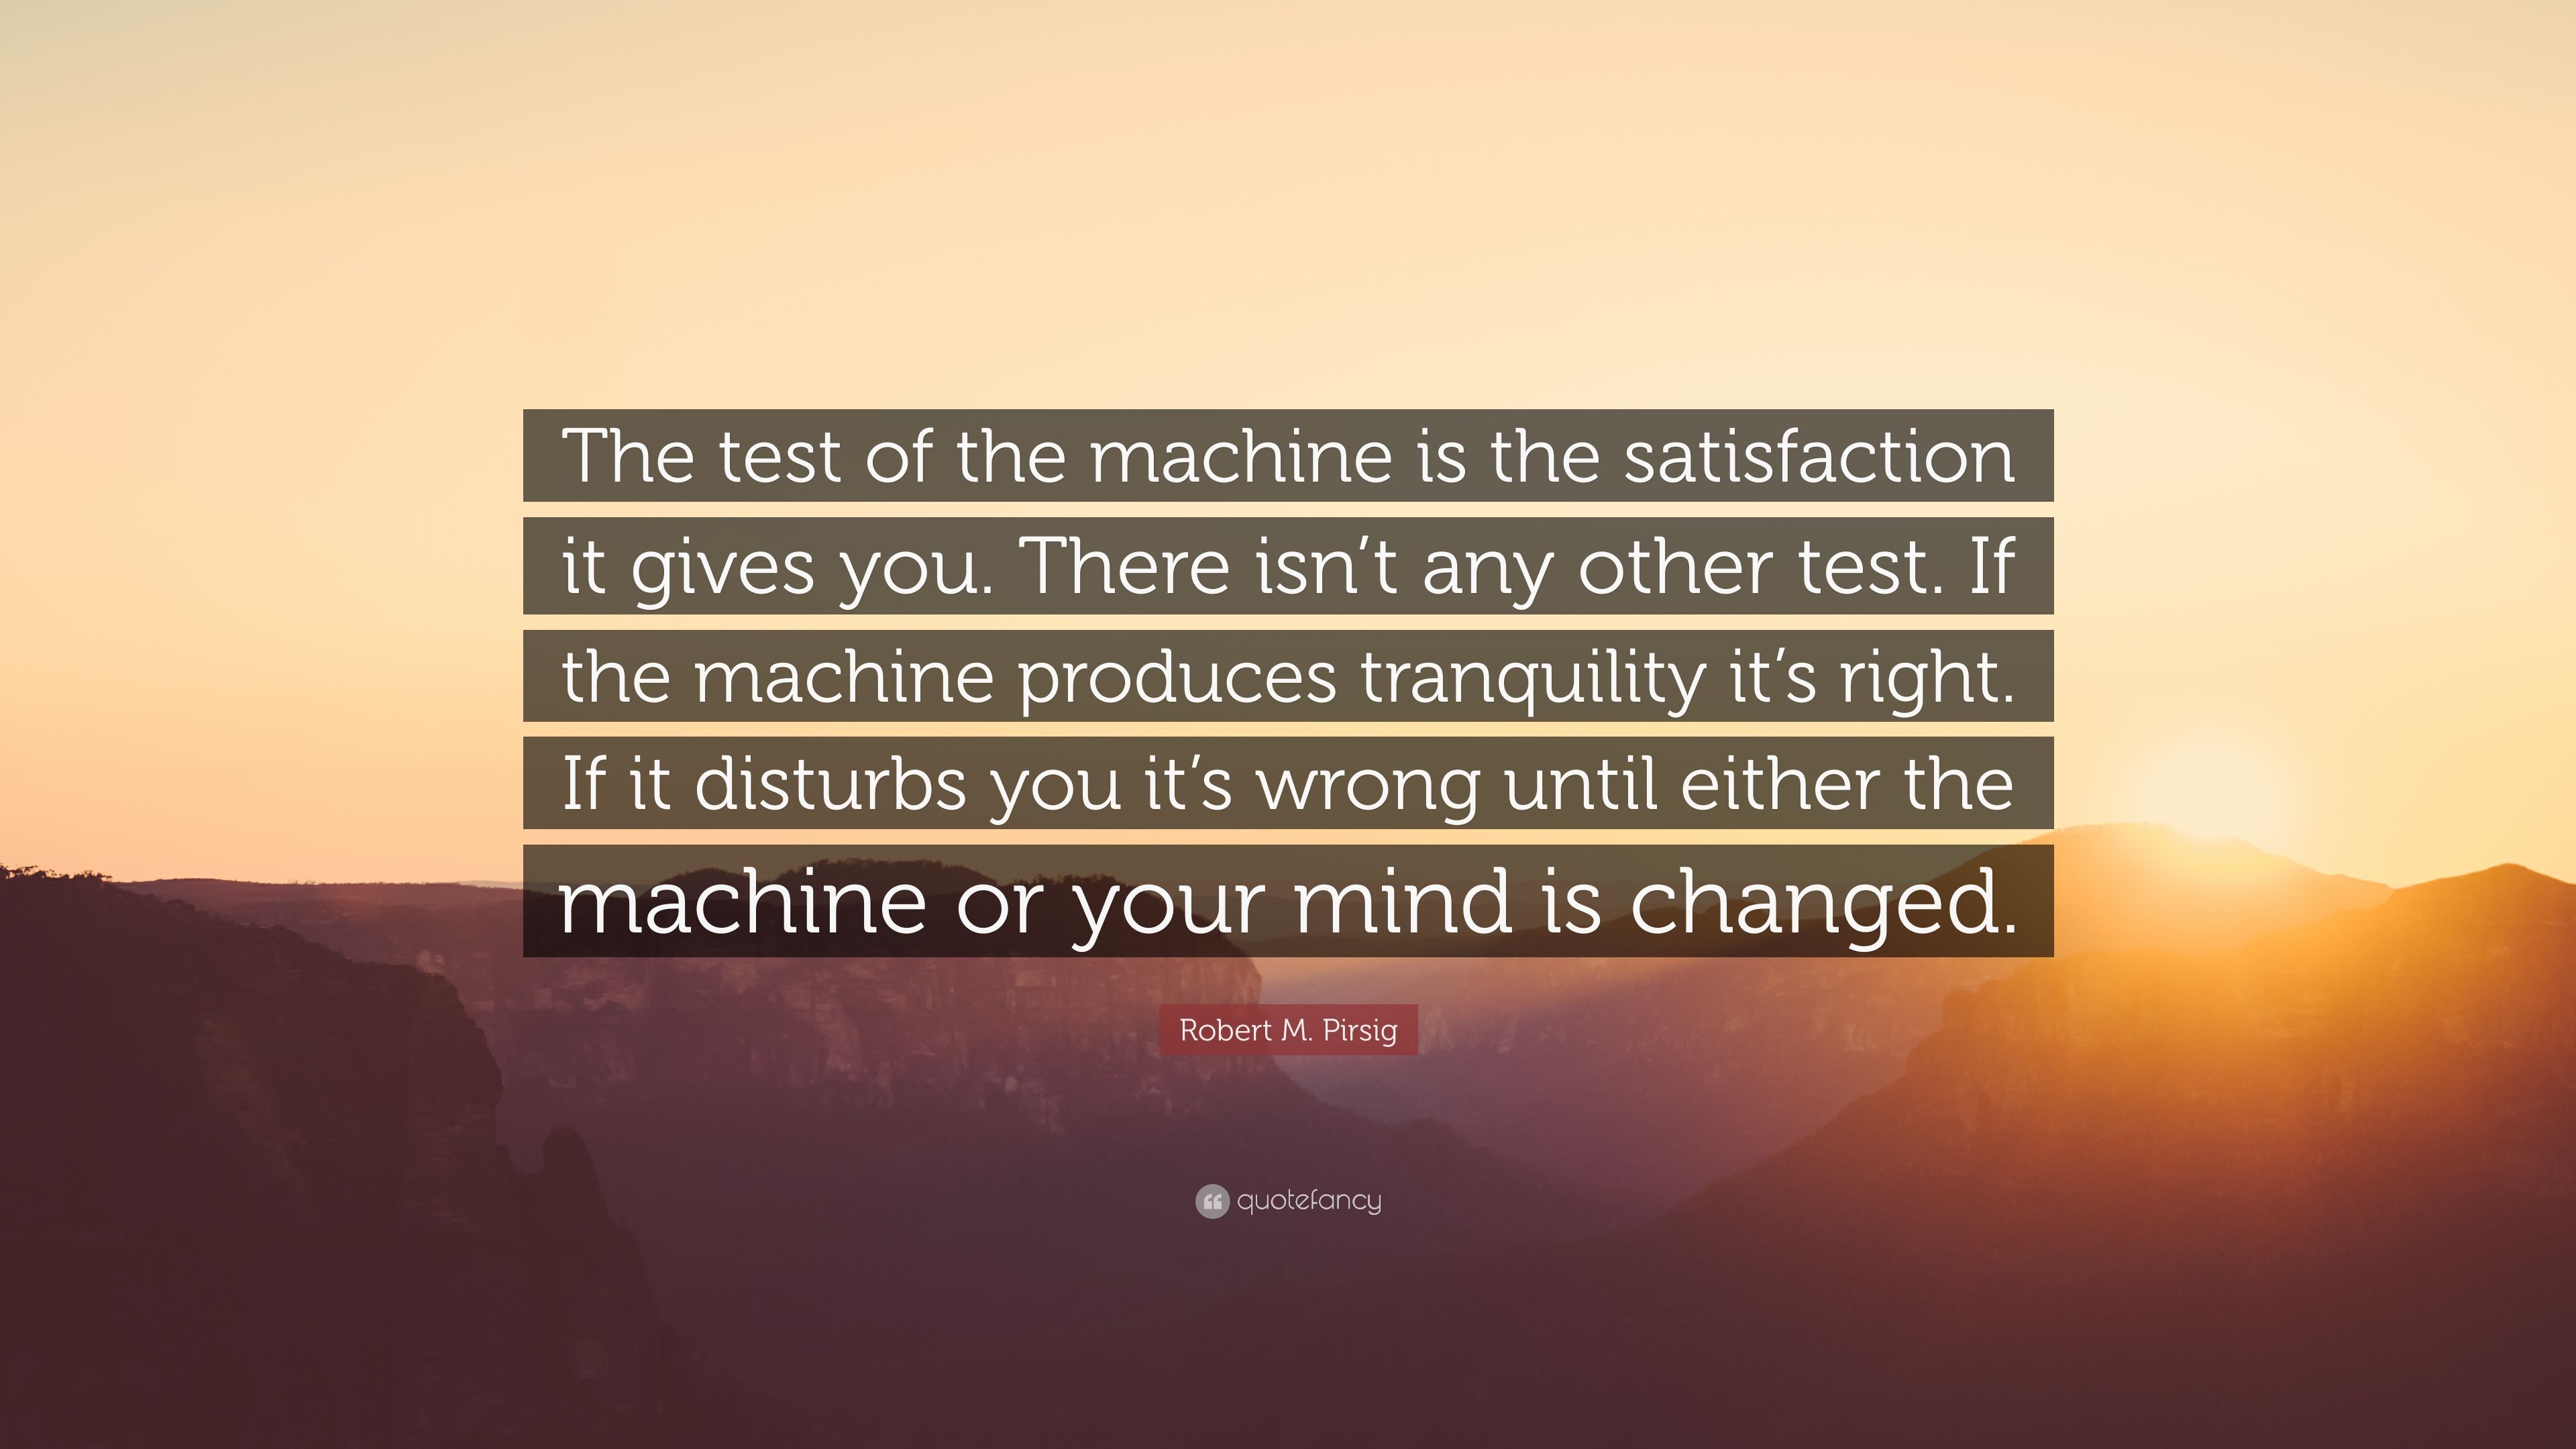 Robert M. Pirsig Quote: “The test of the machine is the satisfaction it gives you. There isn't any other test. If the machine produces tranquilit.” (6 wallpaper)